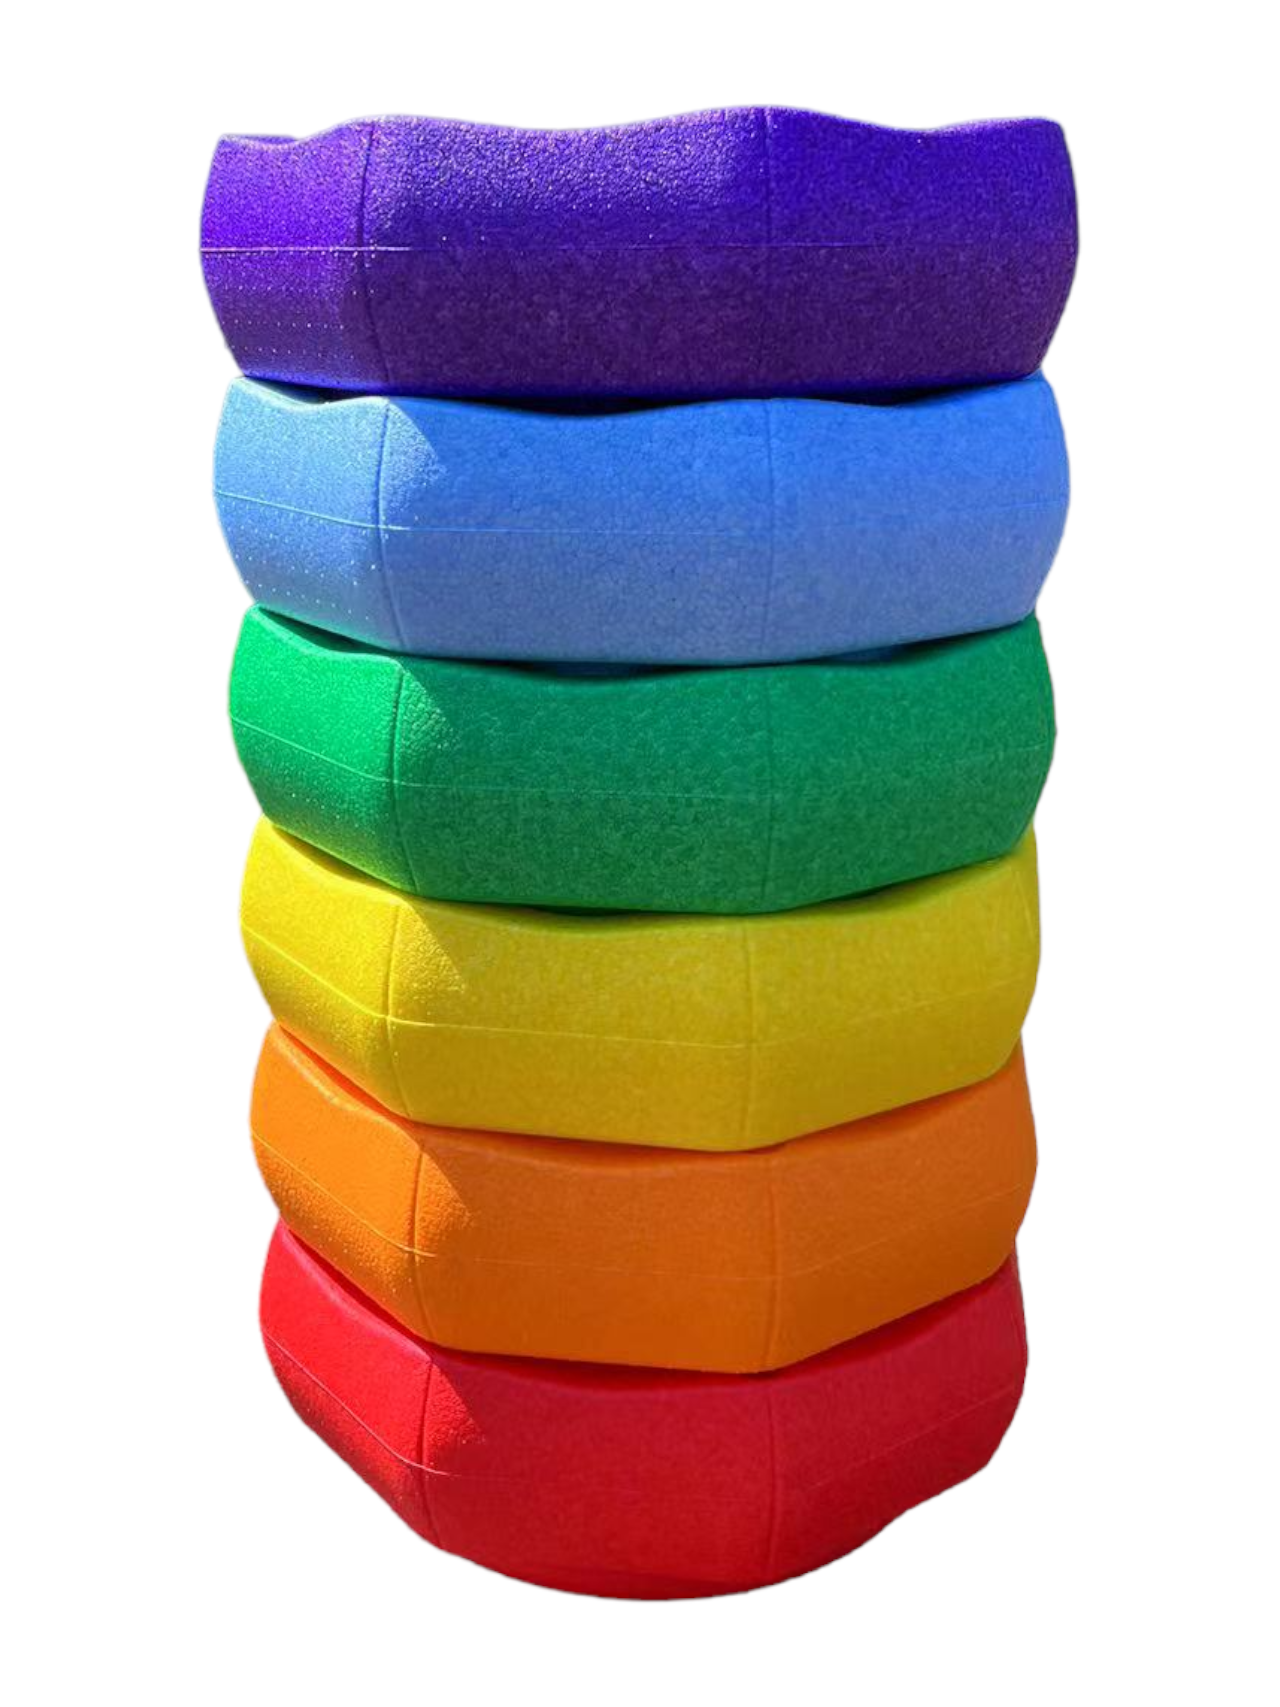 Pre-order (Ships in 2-3 Weeks)**6 Pieces Rainbow Stepping Stones